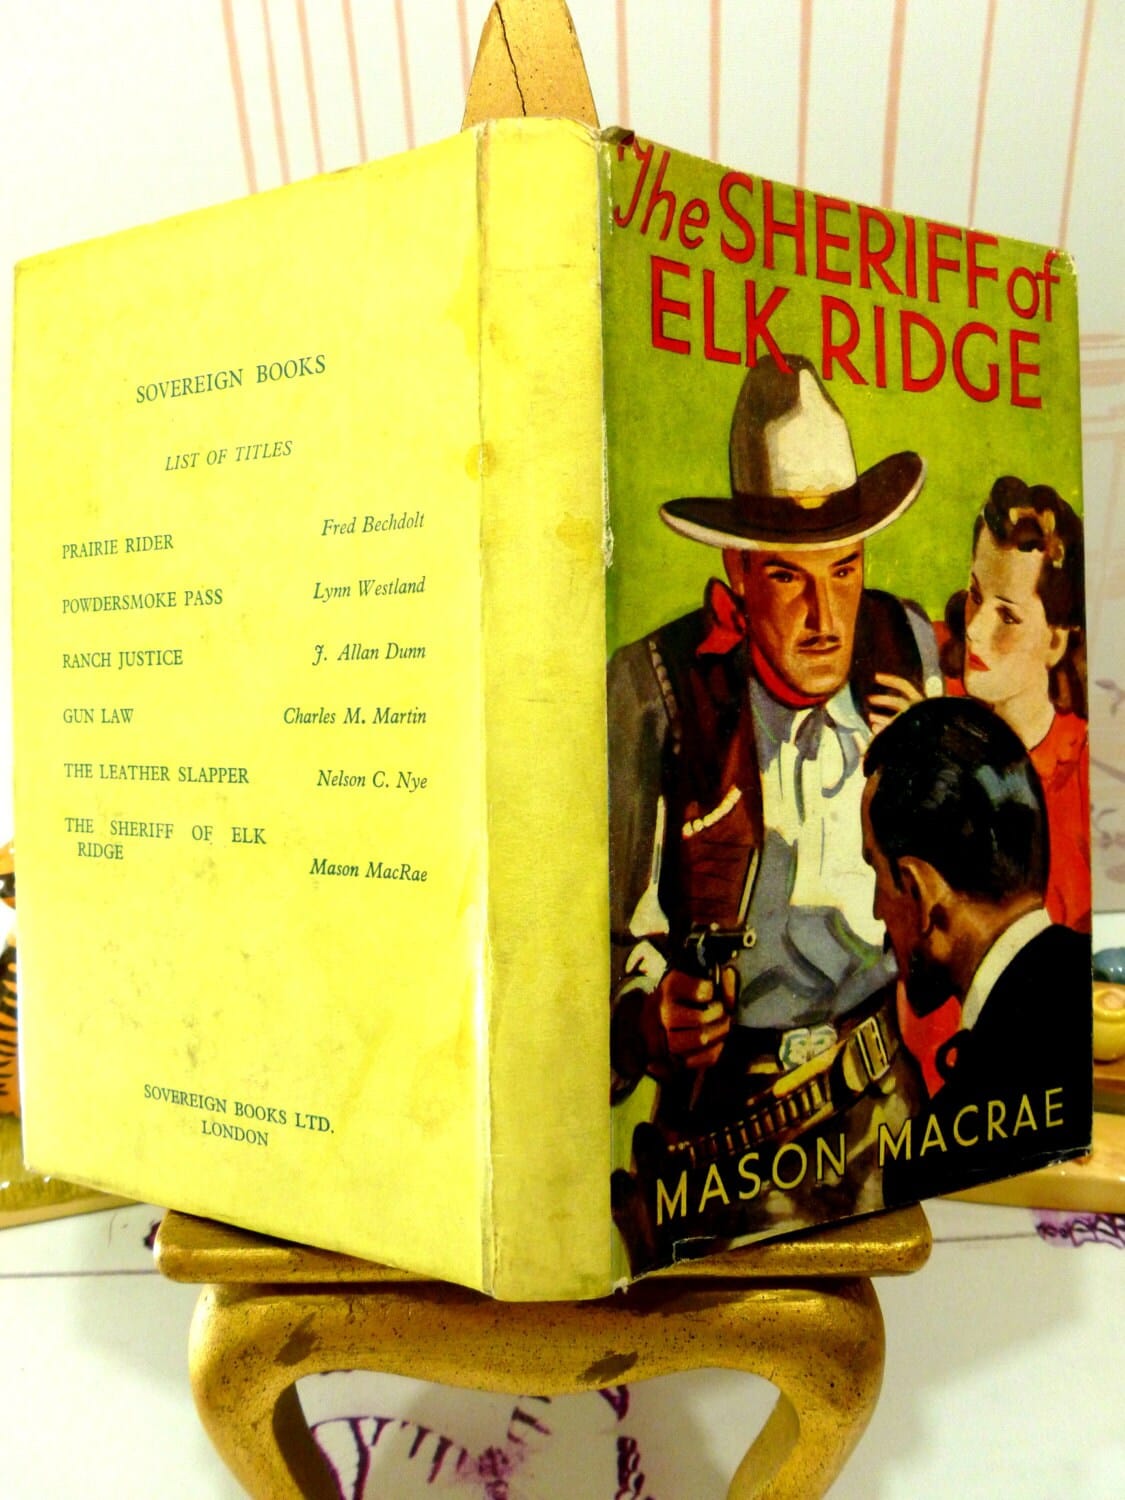 Full cover of book showing the Sheriff of Elk Ridge by Mason Macrae 1st Edition Cowboy Western Pulp Fiction Hardback  1930s Classic Tale of the Old West.